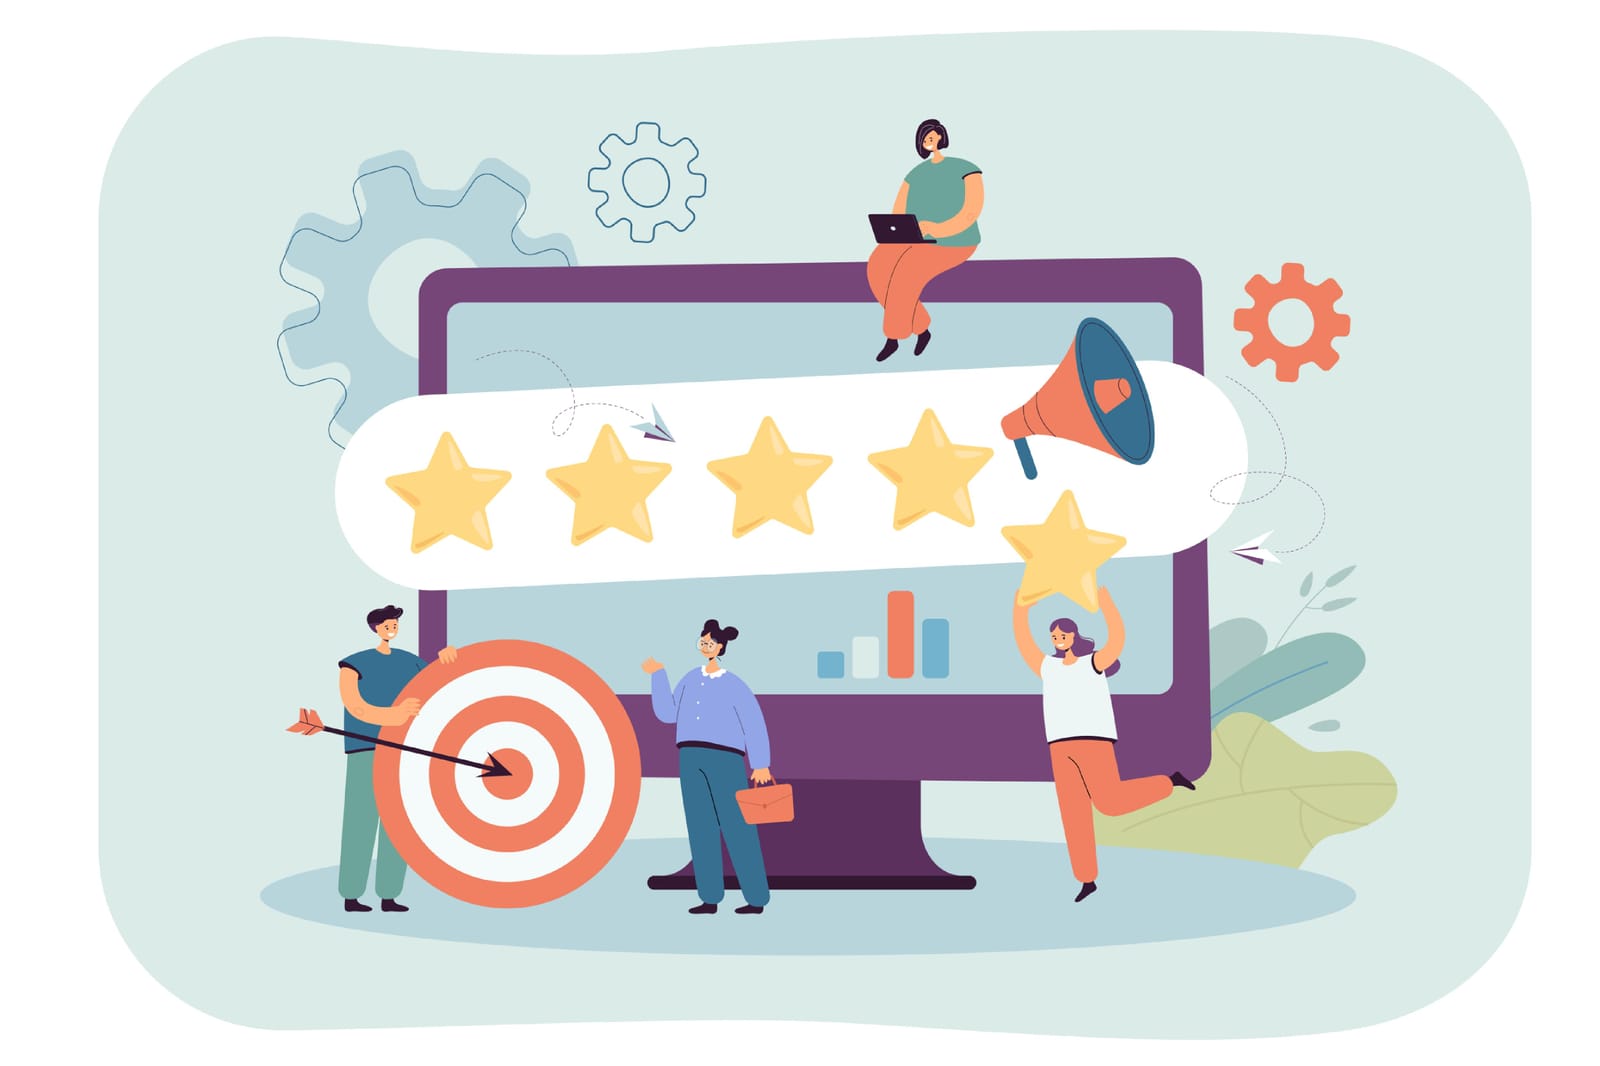 businesses have realized the importance of customer reviews and the need to manage their online reputation. One of the best ways to do this is by using a customer review platform.